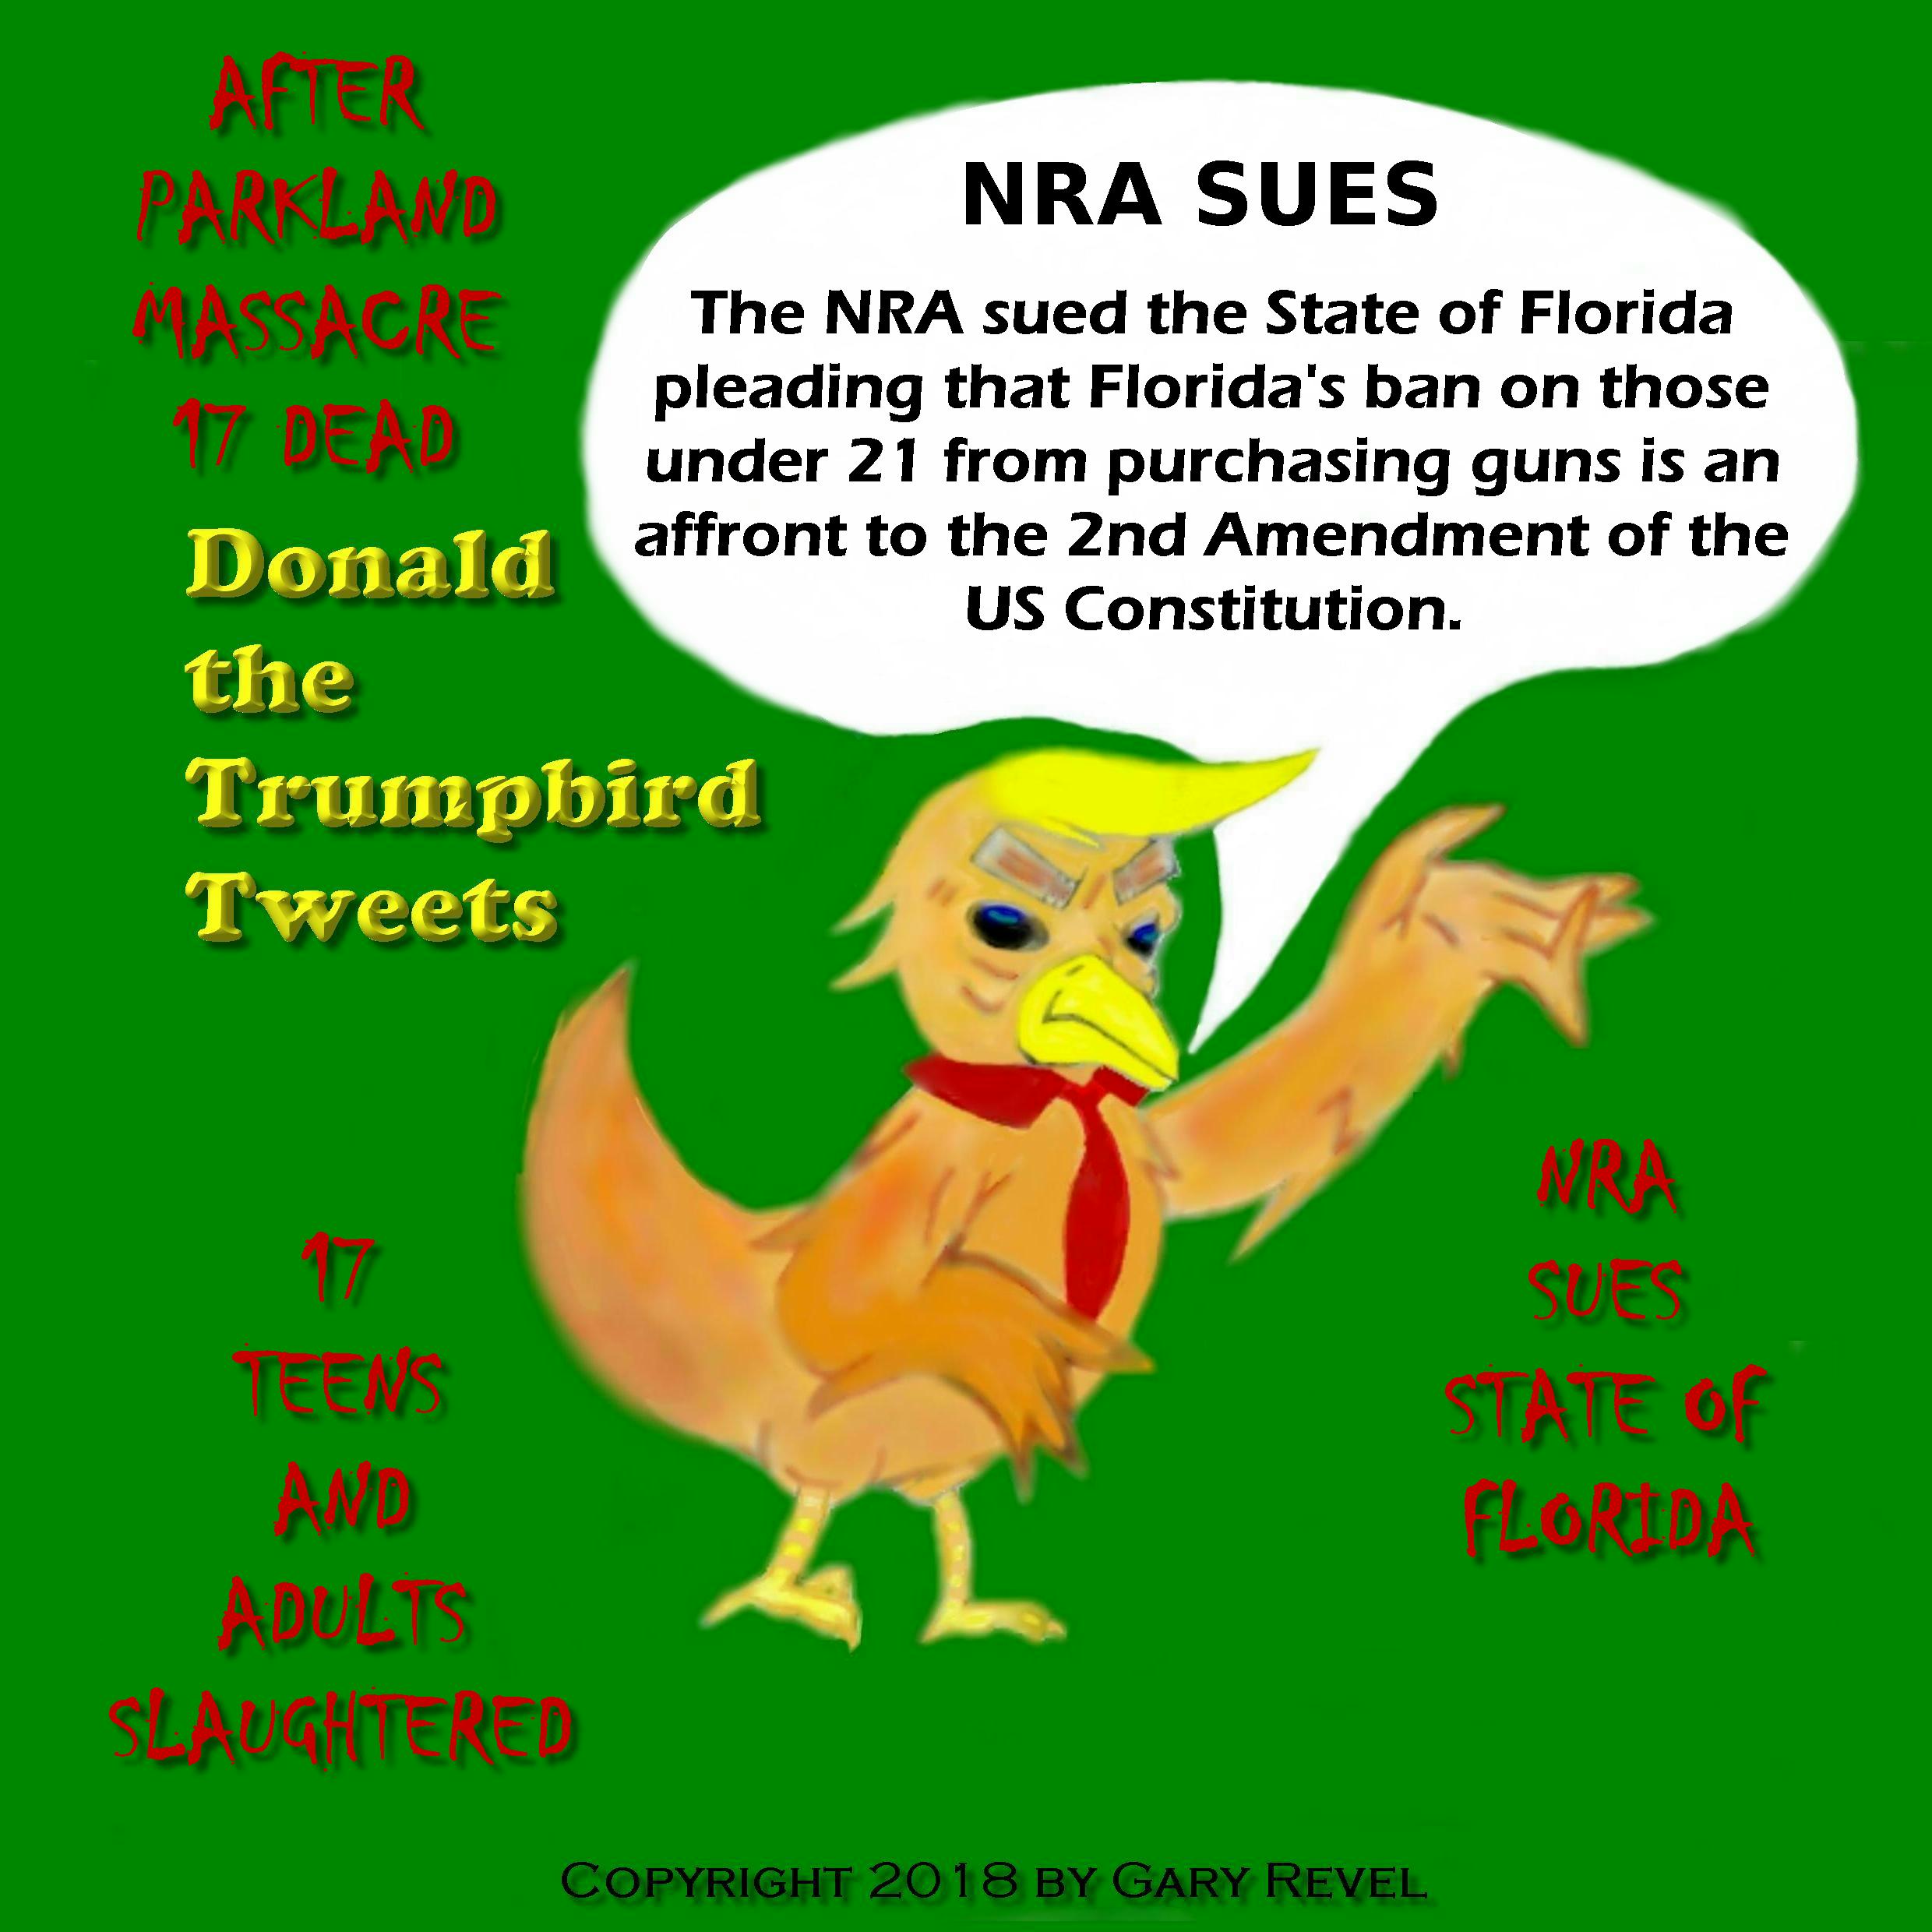 Donald the Trumpbird tweets NRA sues State of Florida after 17 teens and adults were slaughtered in Parkland school.